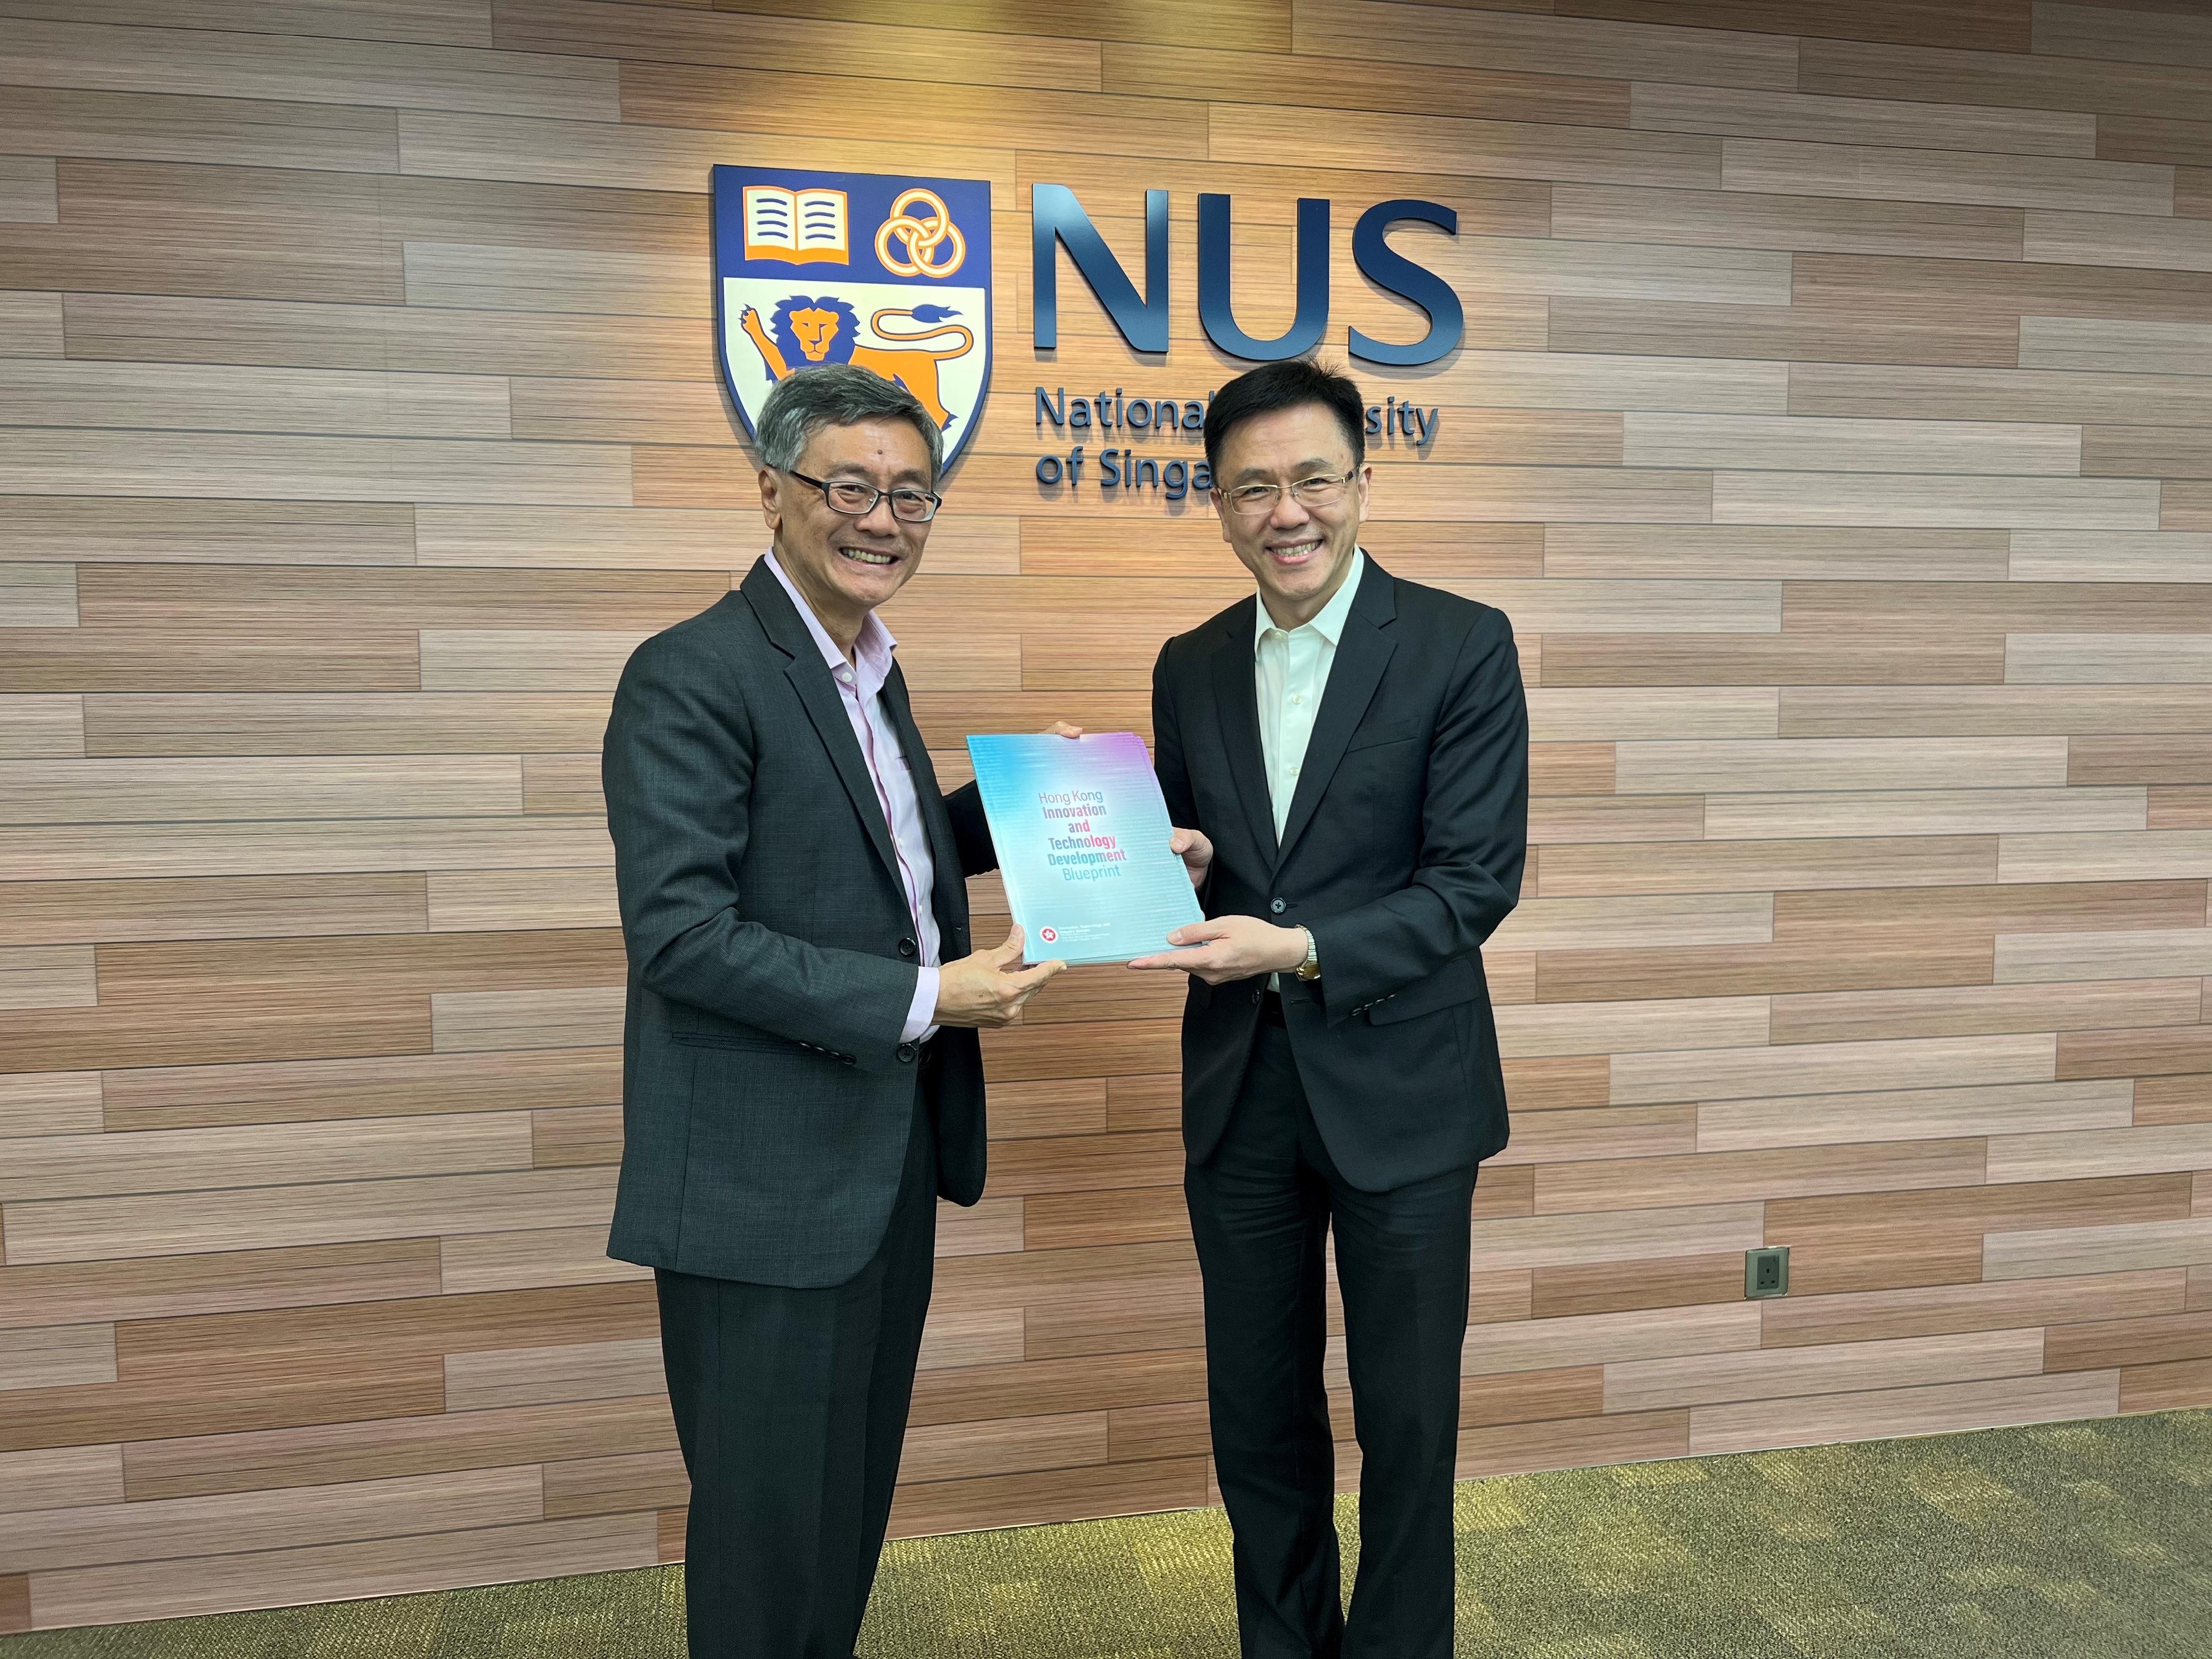 The Secretary for Innovation, Technology and Industry, Professor Sun Dong (right), visits the National University of Singapore today (May 22) in Singapore and presents the Hong Kong Innovation and Technology Development Blueprint to the President of the National University of Singapore, Professor Tan Eng Chye (left).